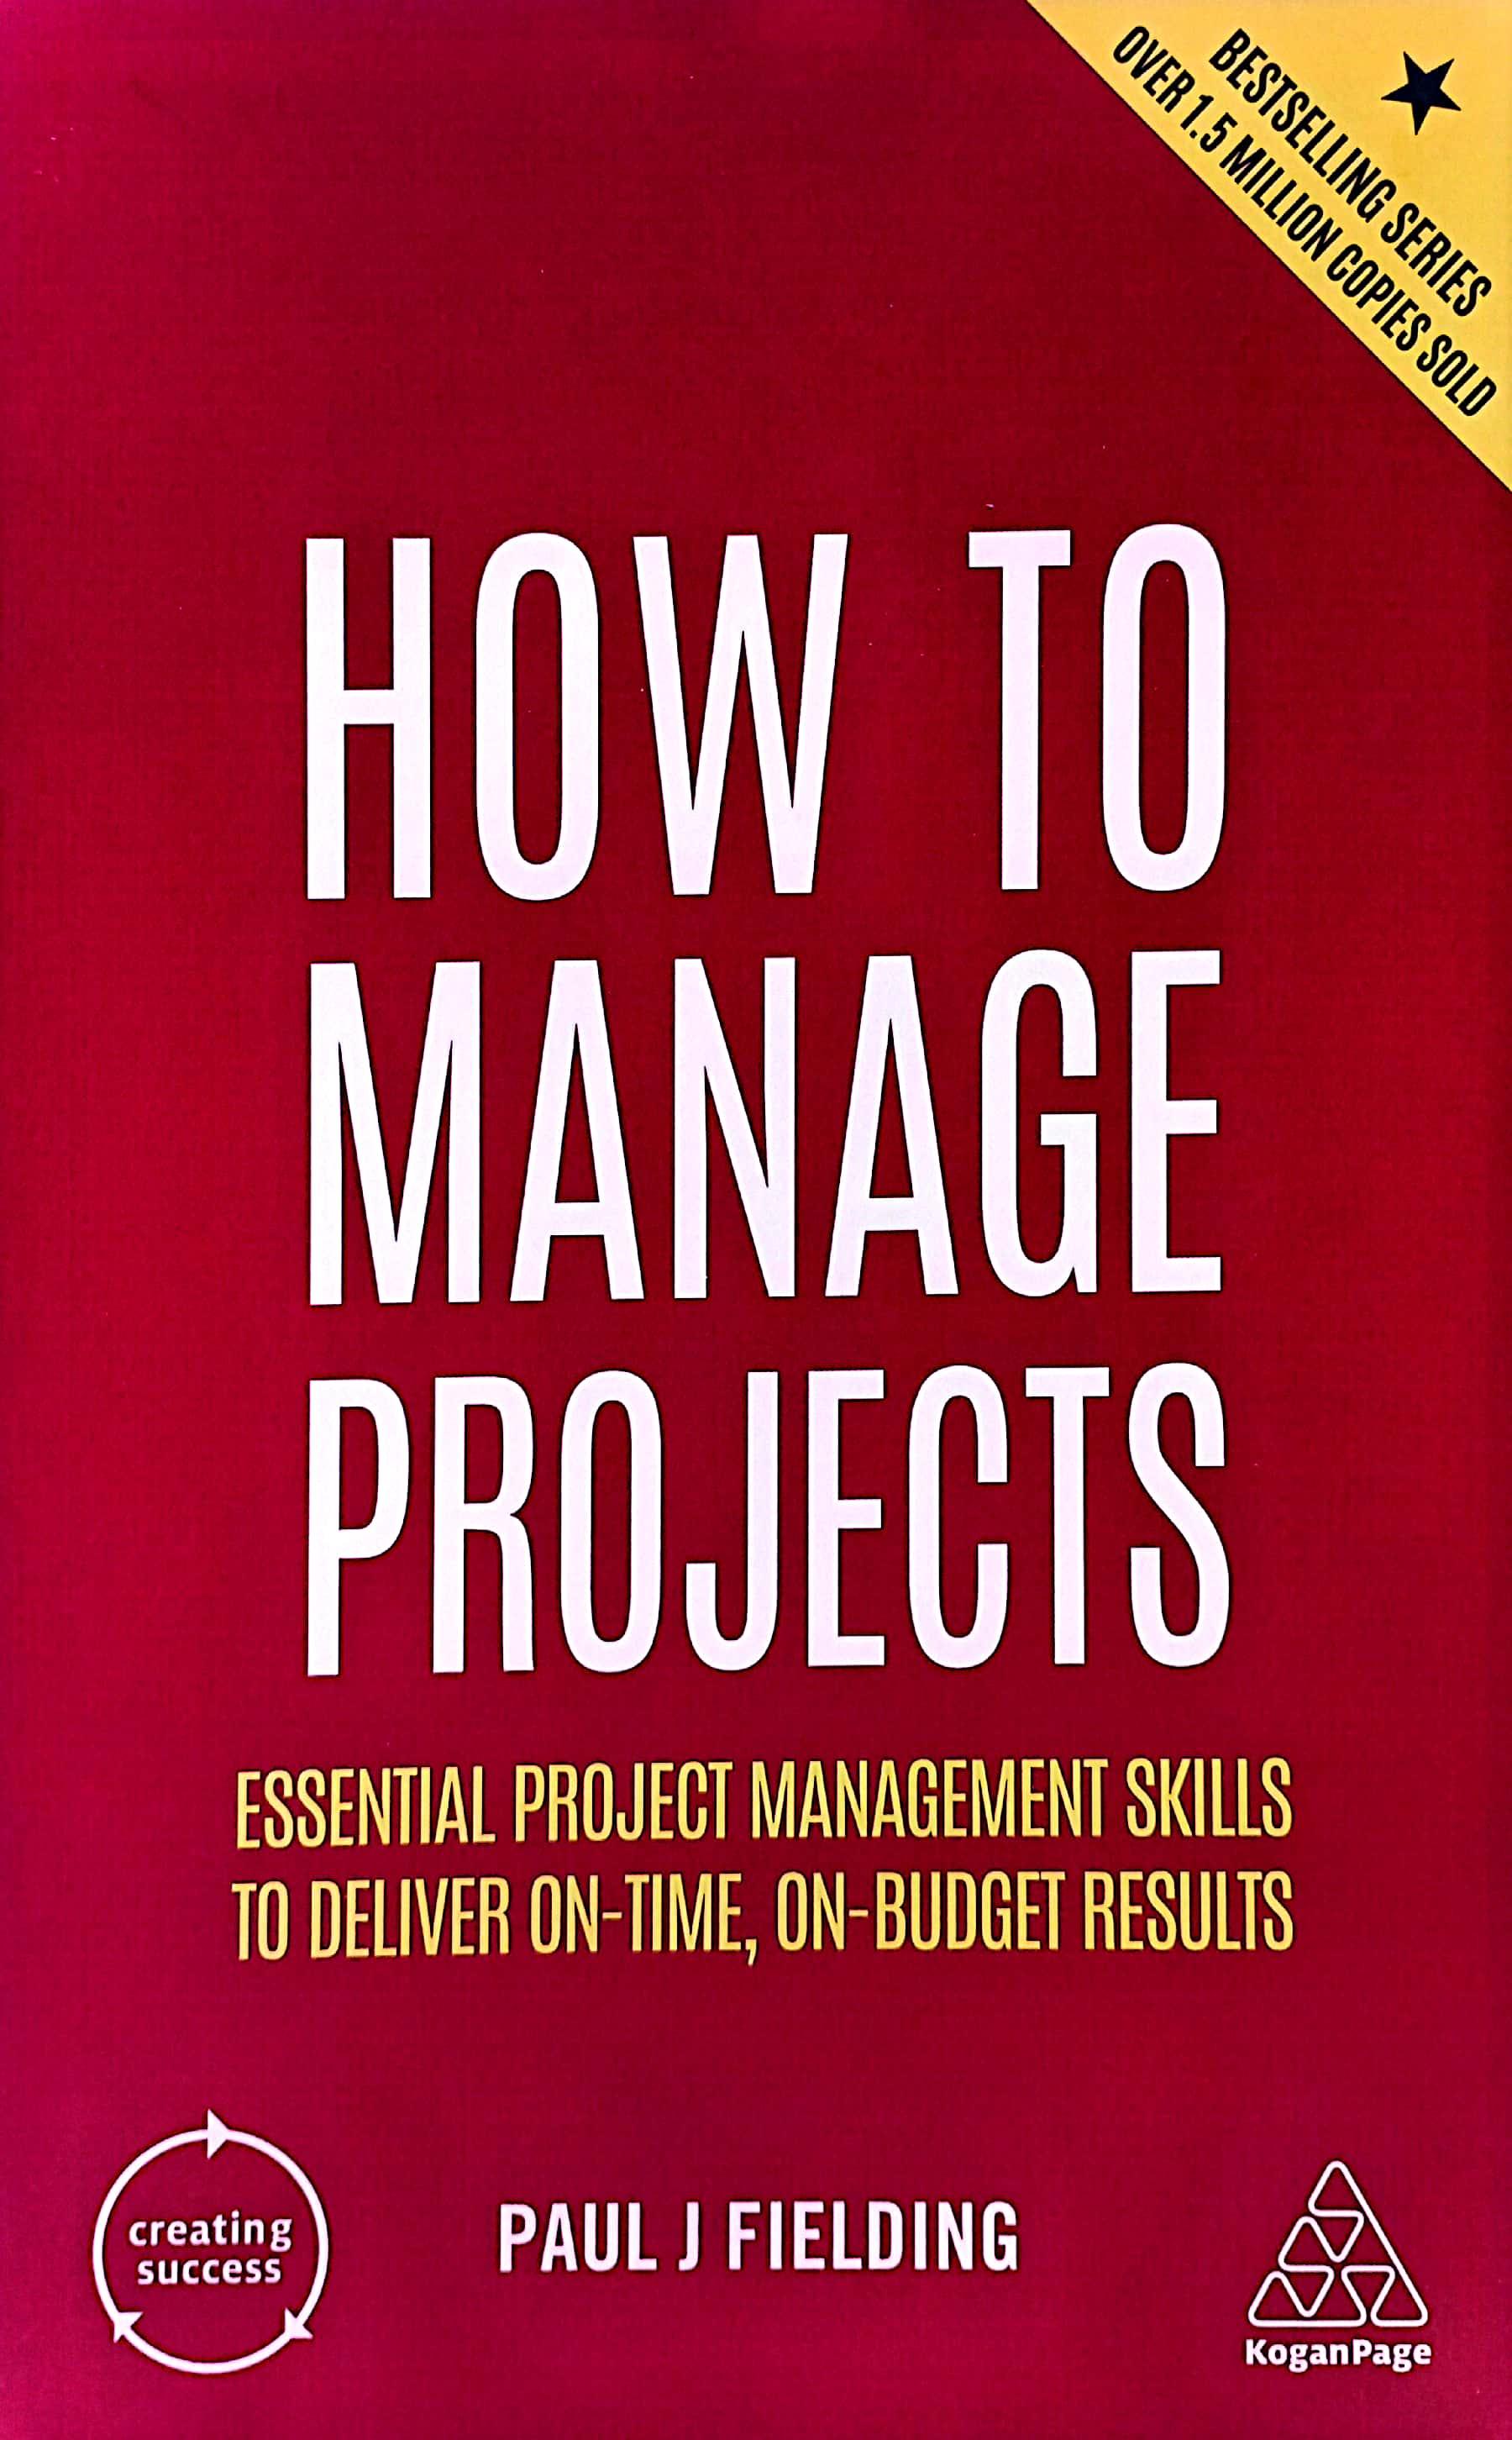 How To Manage Projects: Essential Project Management Skills To Deliver On-time, On-Budget Results